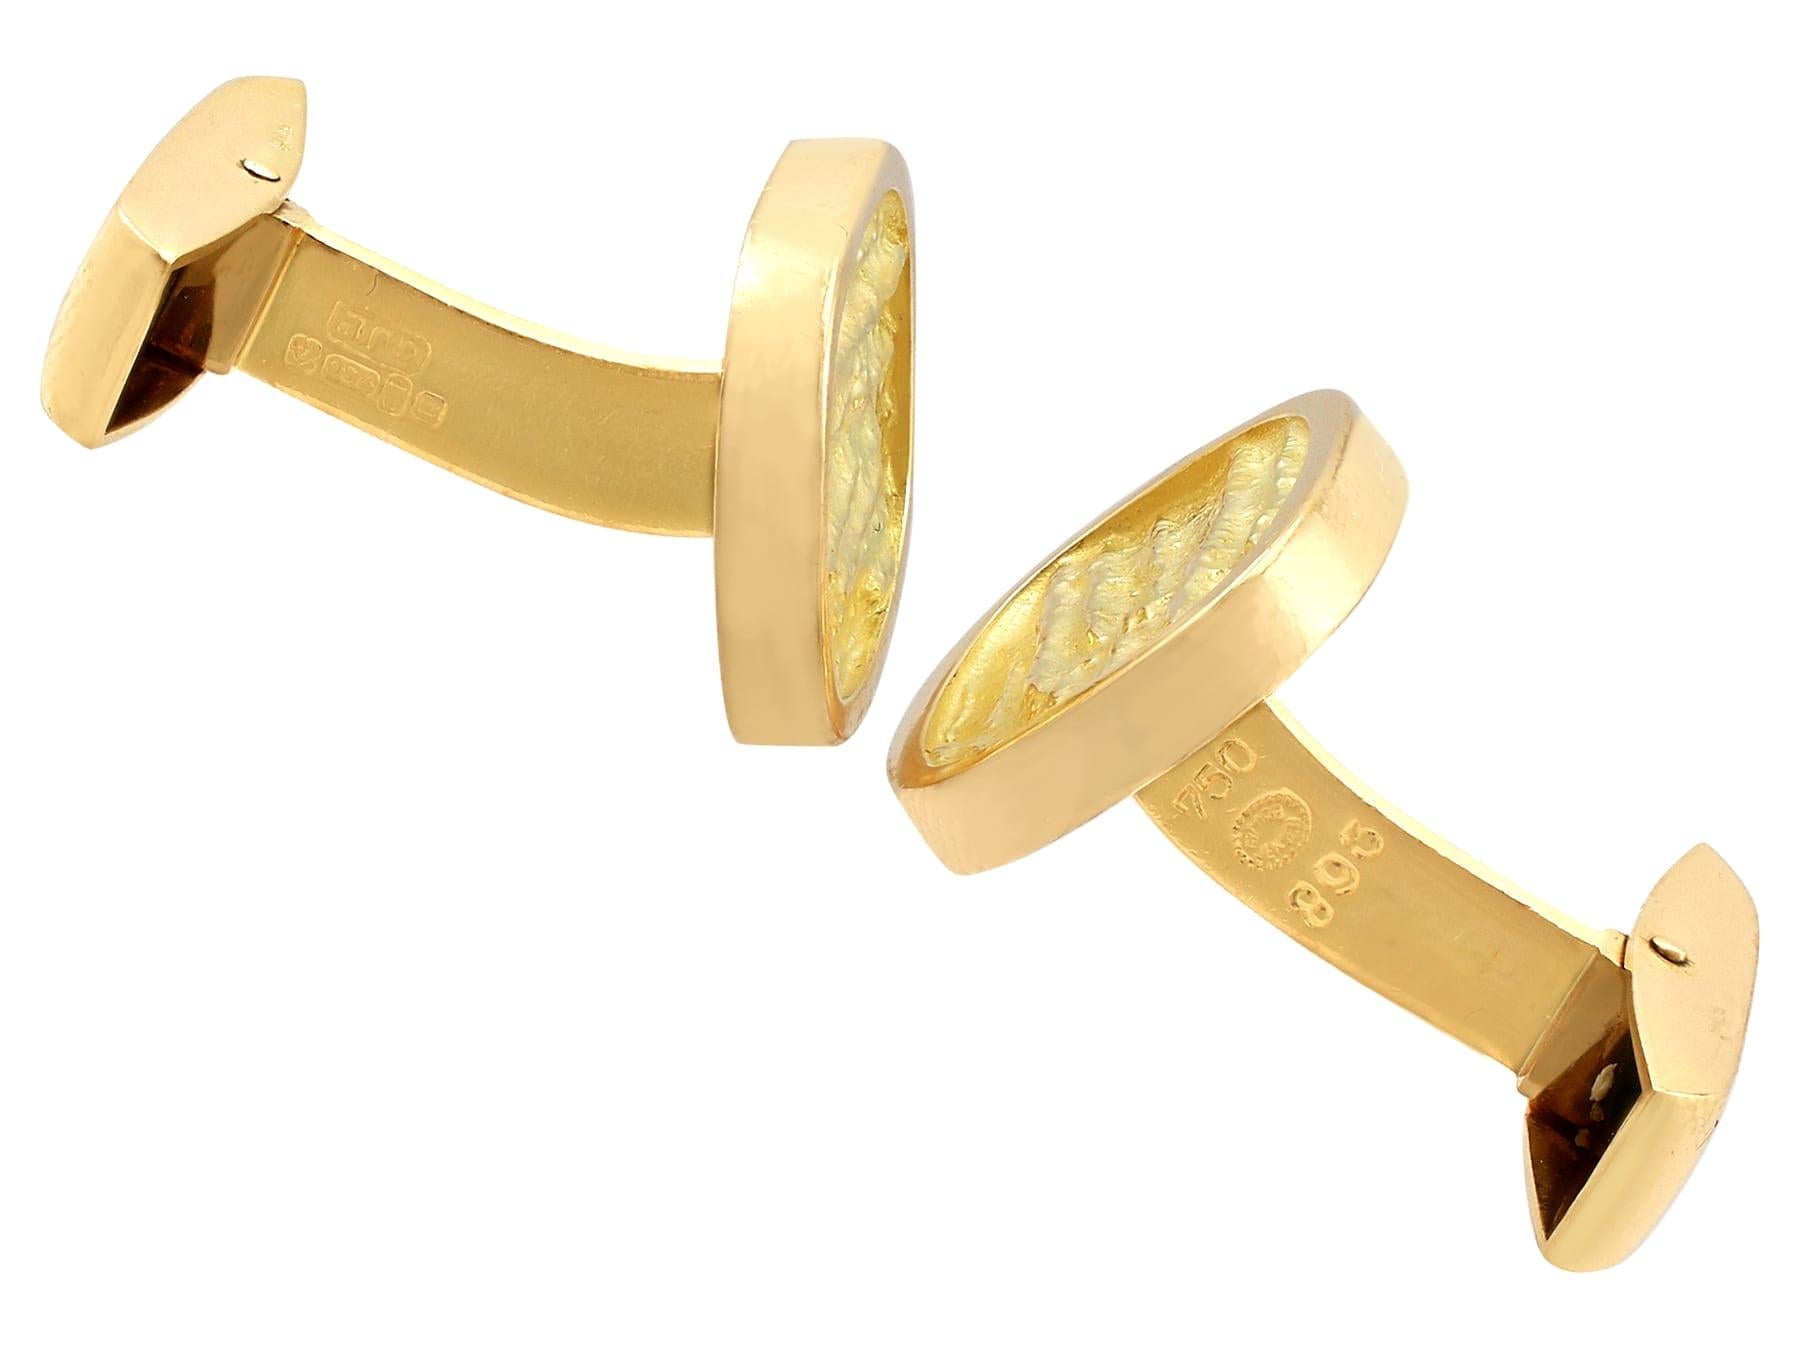 Vintage 1967 Yellow Gold Cufflinks by Georg Jensen In Excellent Condition For Sale In Jesmond, Newcastle Upon Tyne